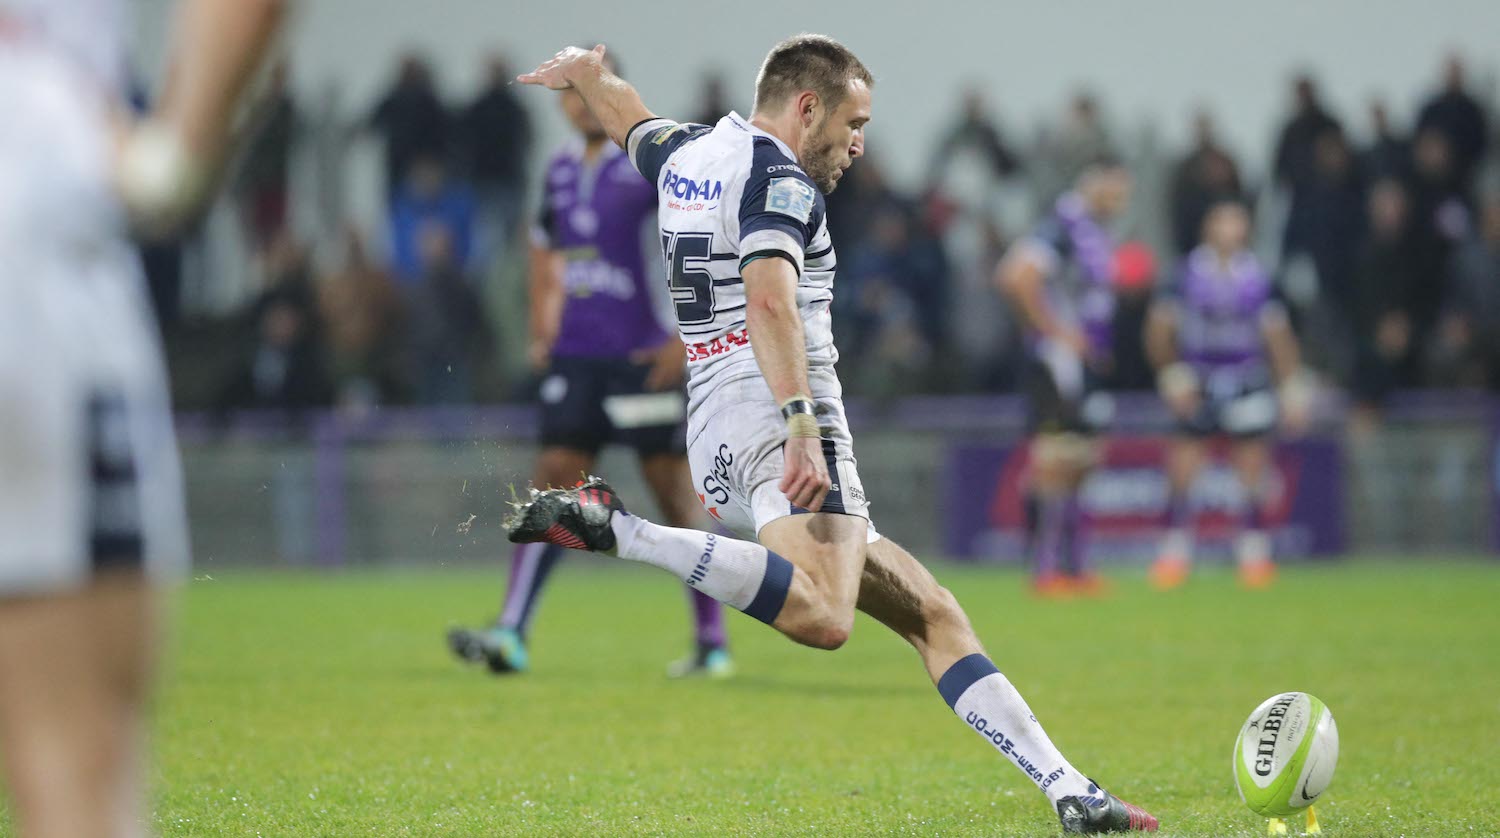 PRO D2 | US MONTALBANAISE - COLOMIERS RUGBY : 19-21